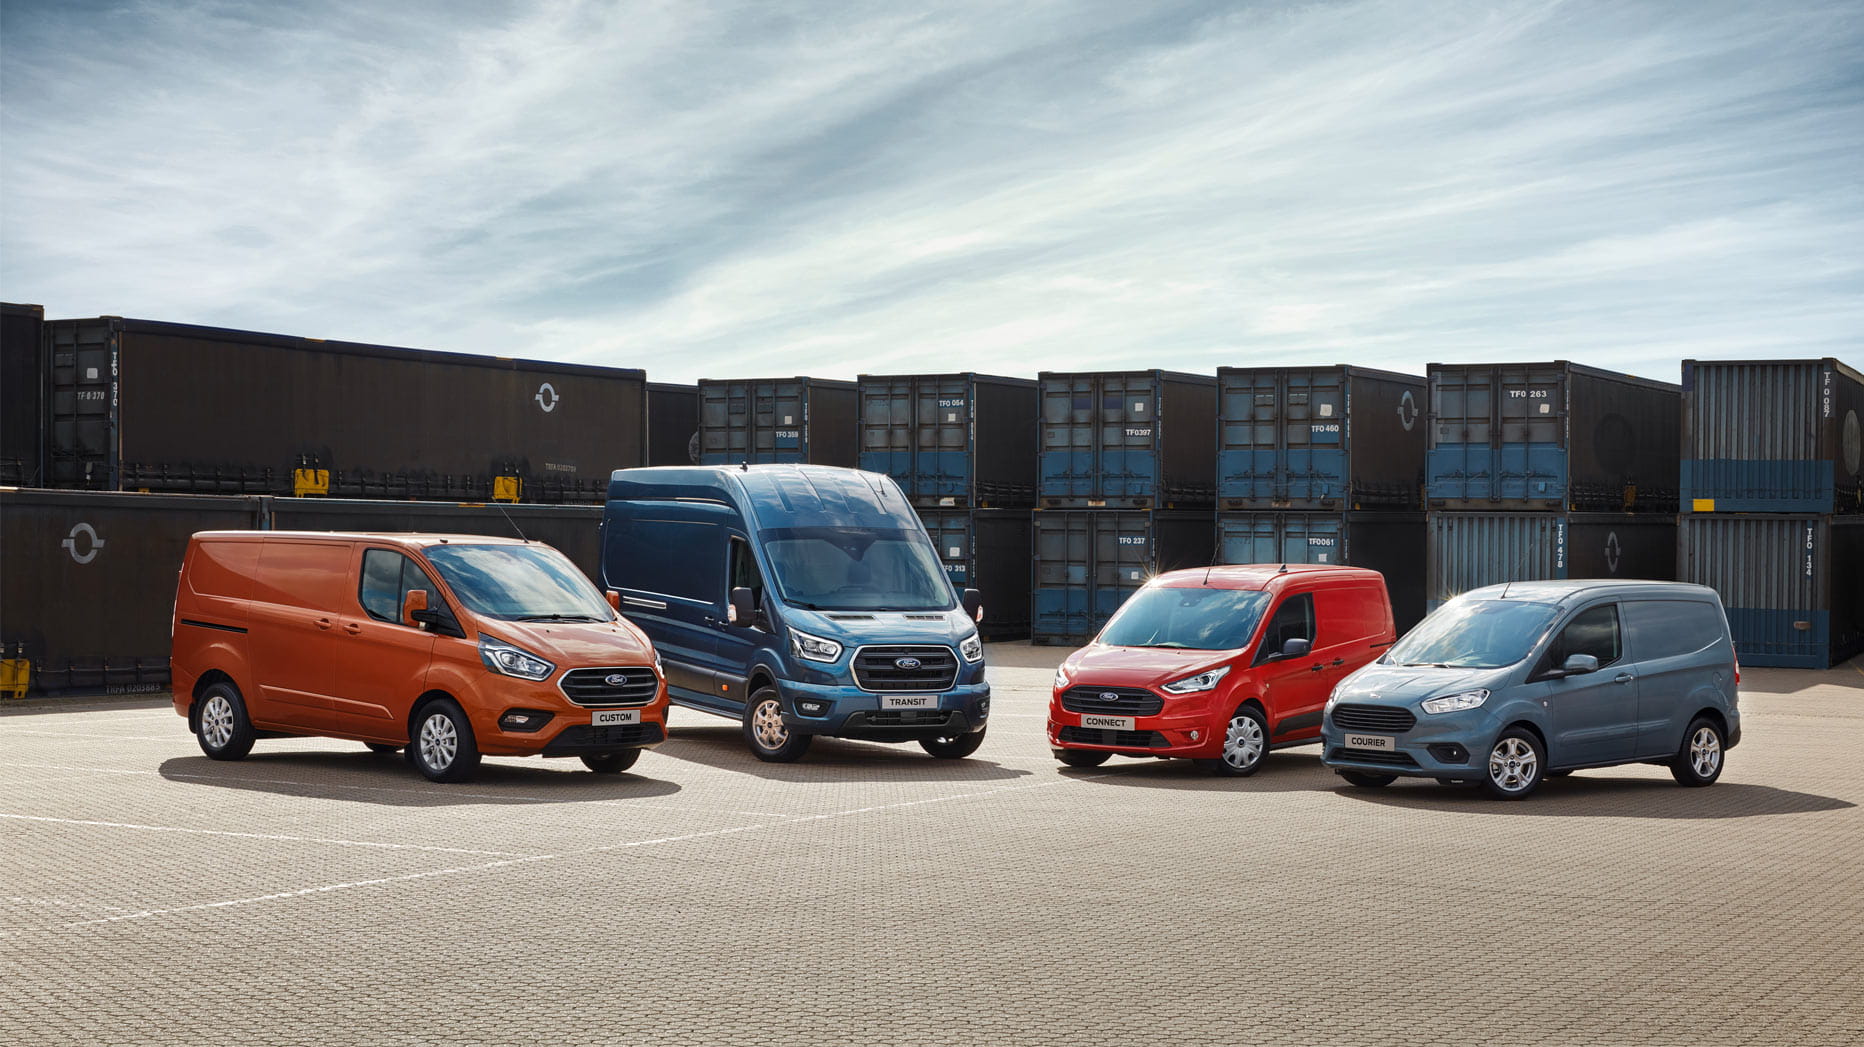 ford commercial van dealers near me